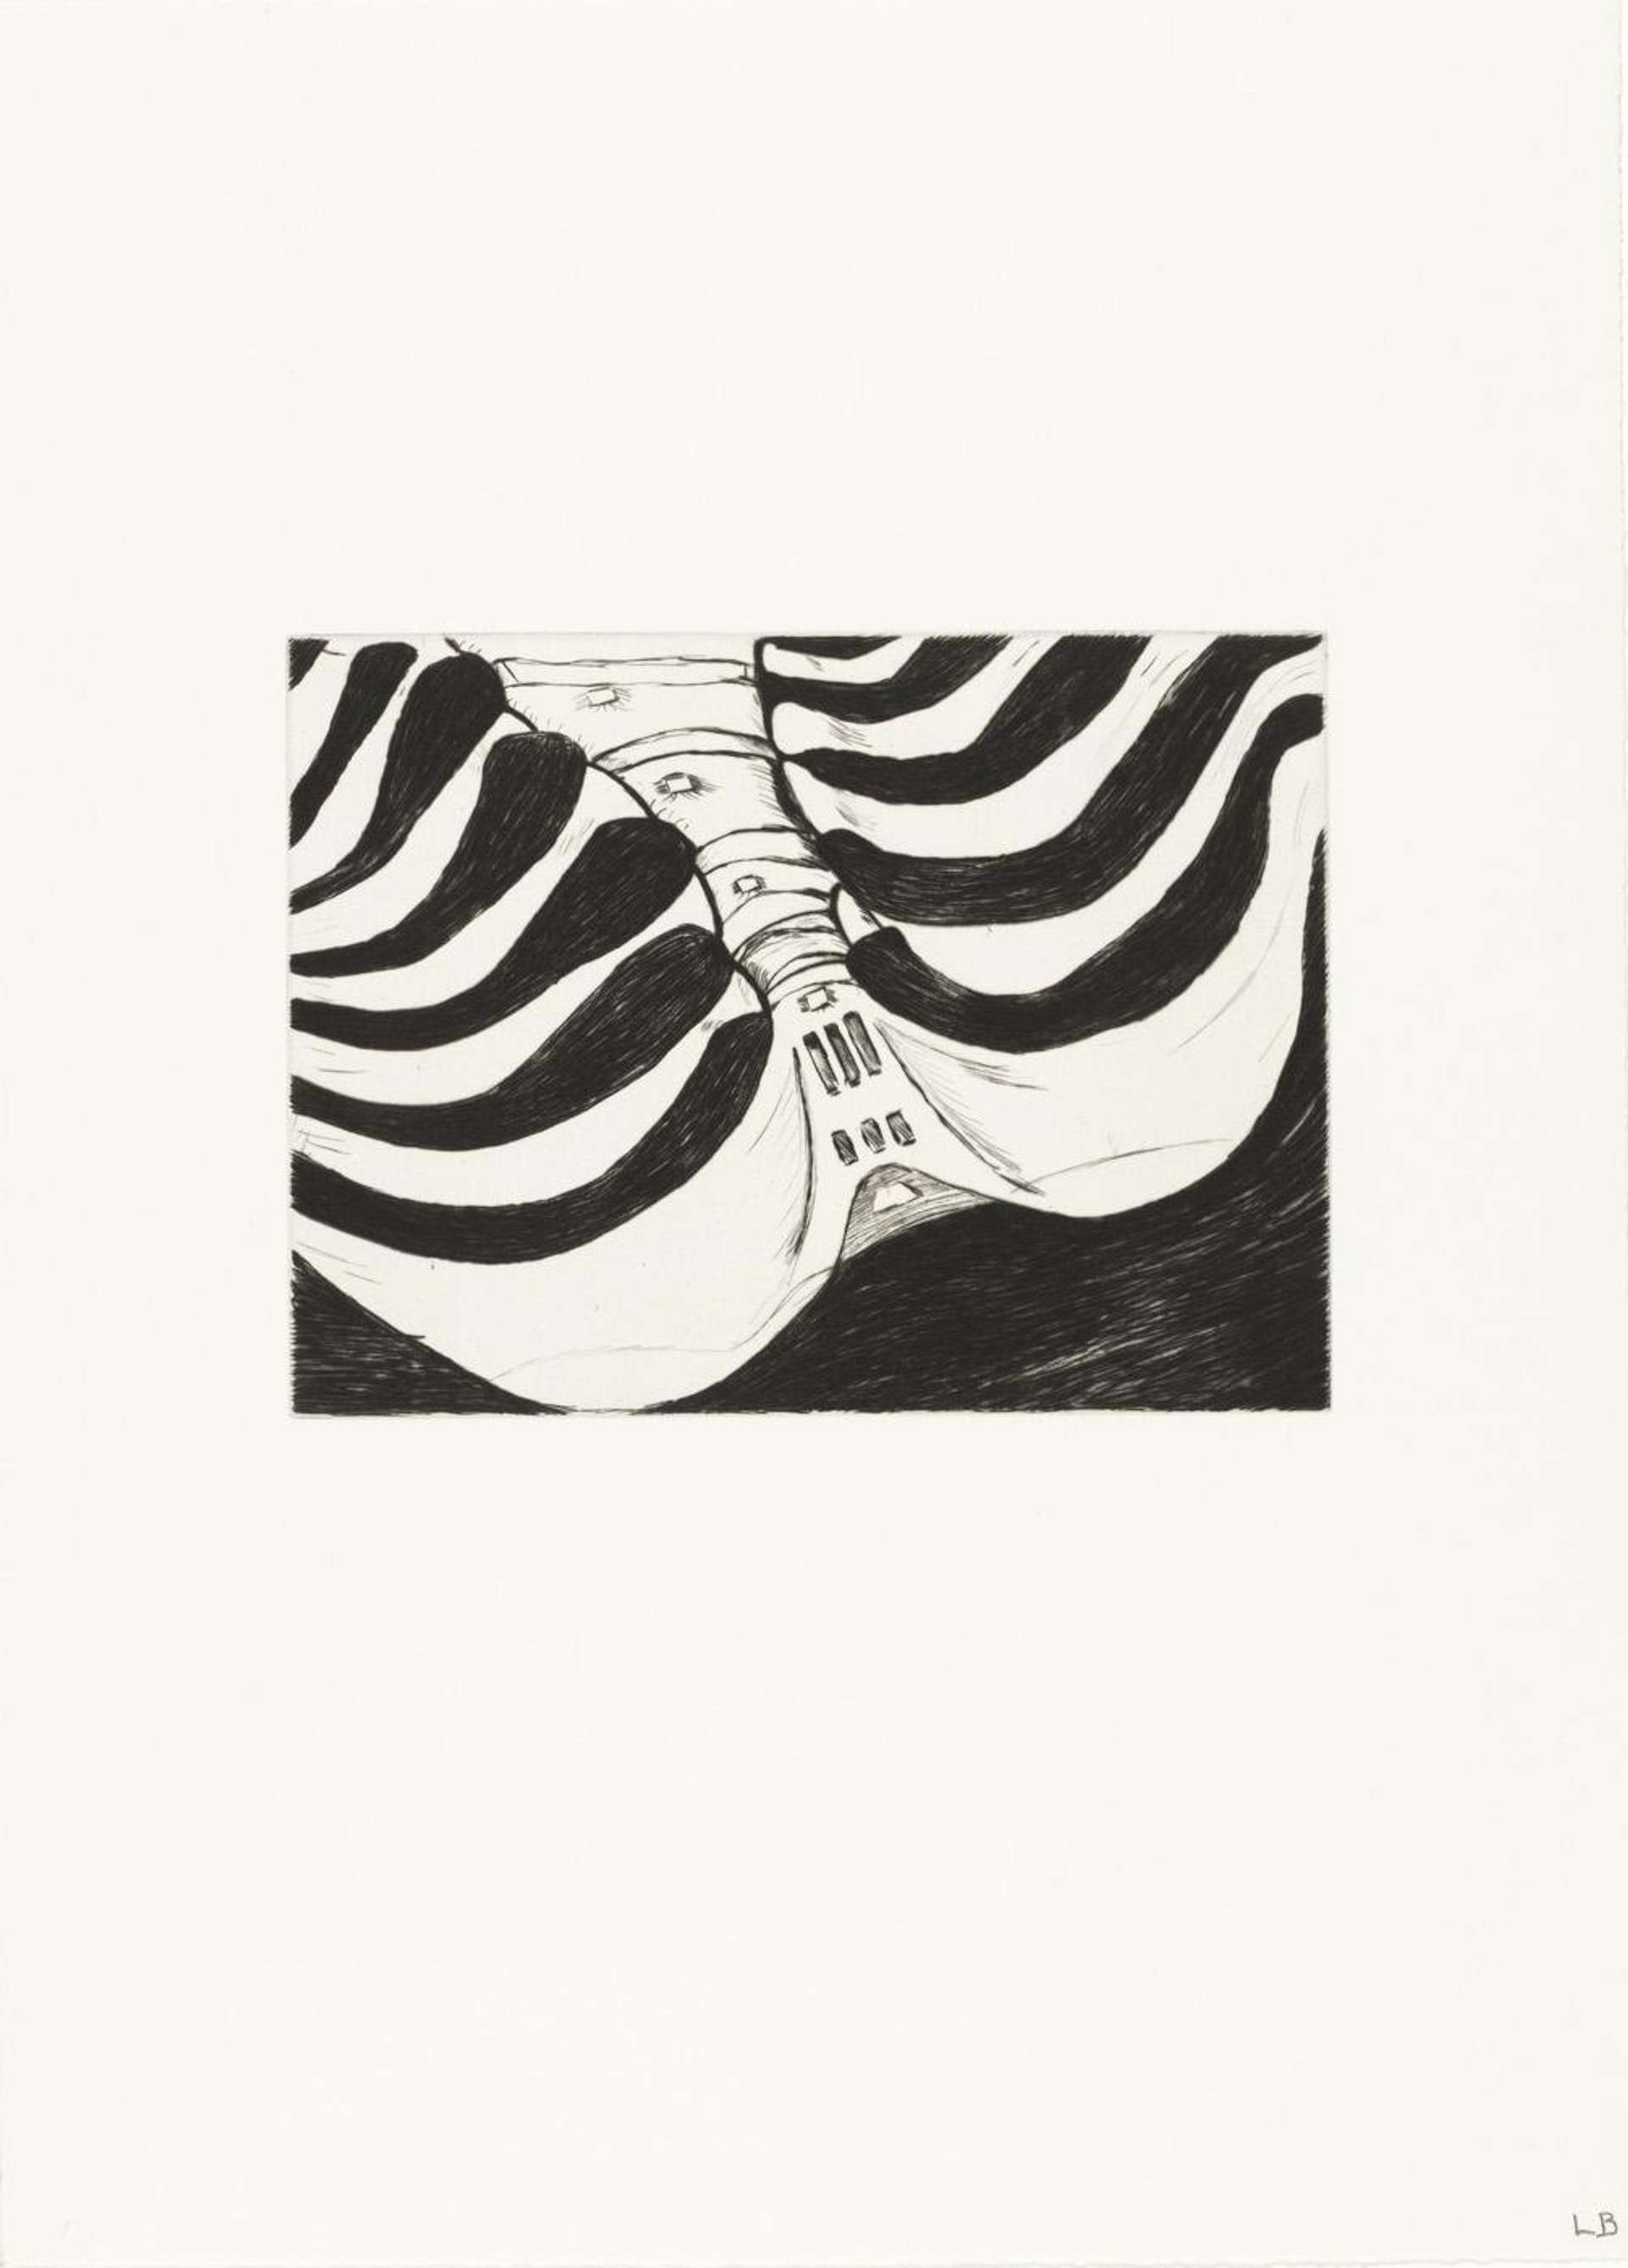 Louise Bourgeois Untitled No. 5. A monochromatic etching of a rib cage. 